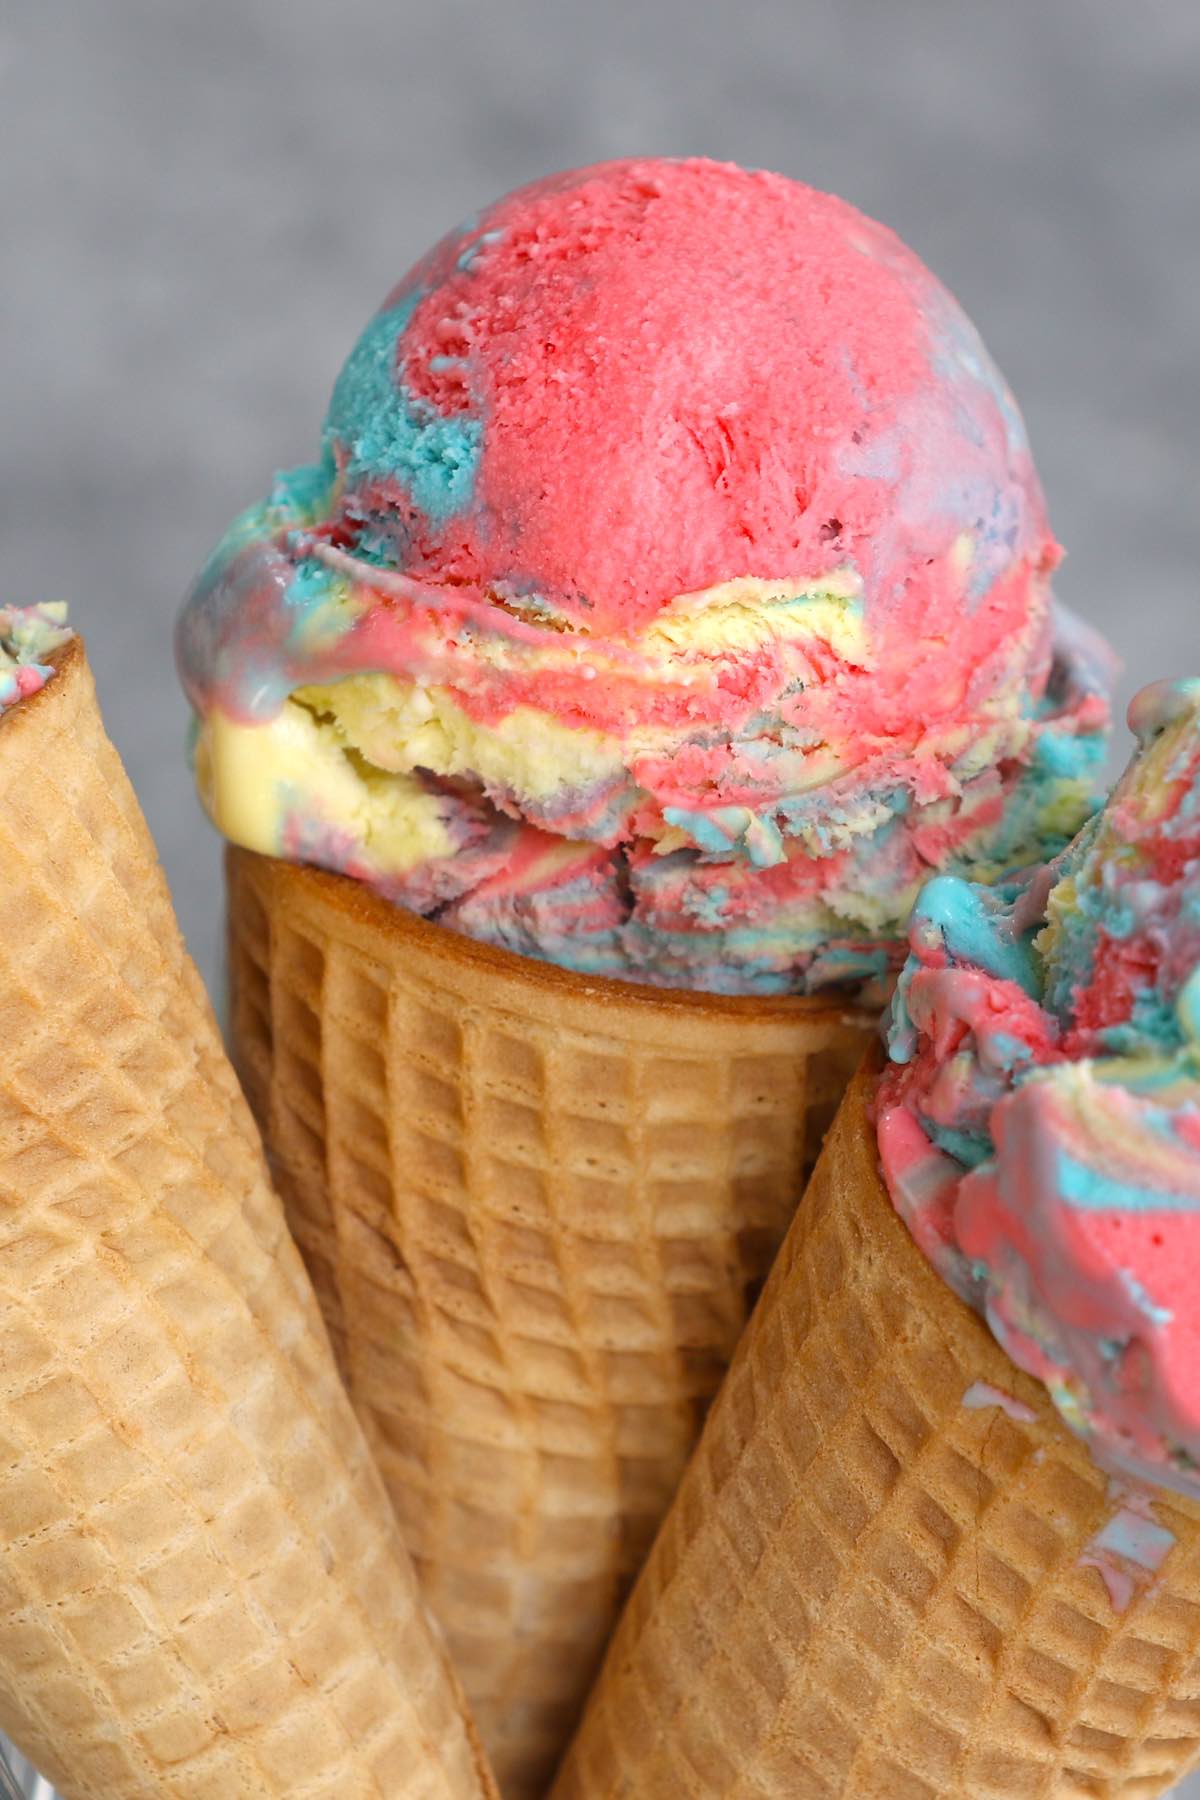 Looking for a fun way to cool down on a hot day? Look no further than Superman Ice Cream – Michigan’s favorite ice cream flavor! Our homemade vanilla superman ice cream comes as a swirl of 3 colors: blue, red, and yellow, just like the colors of Superman’s costume. This easy recipe will have you indulging in a sweet rainbow scoop in very little time.